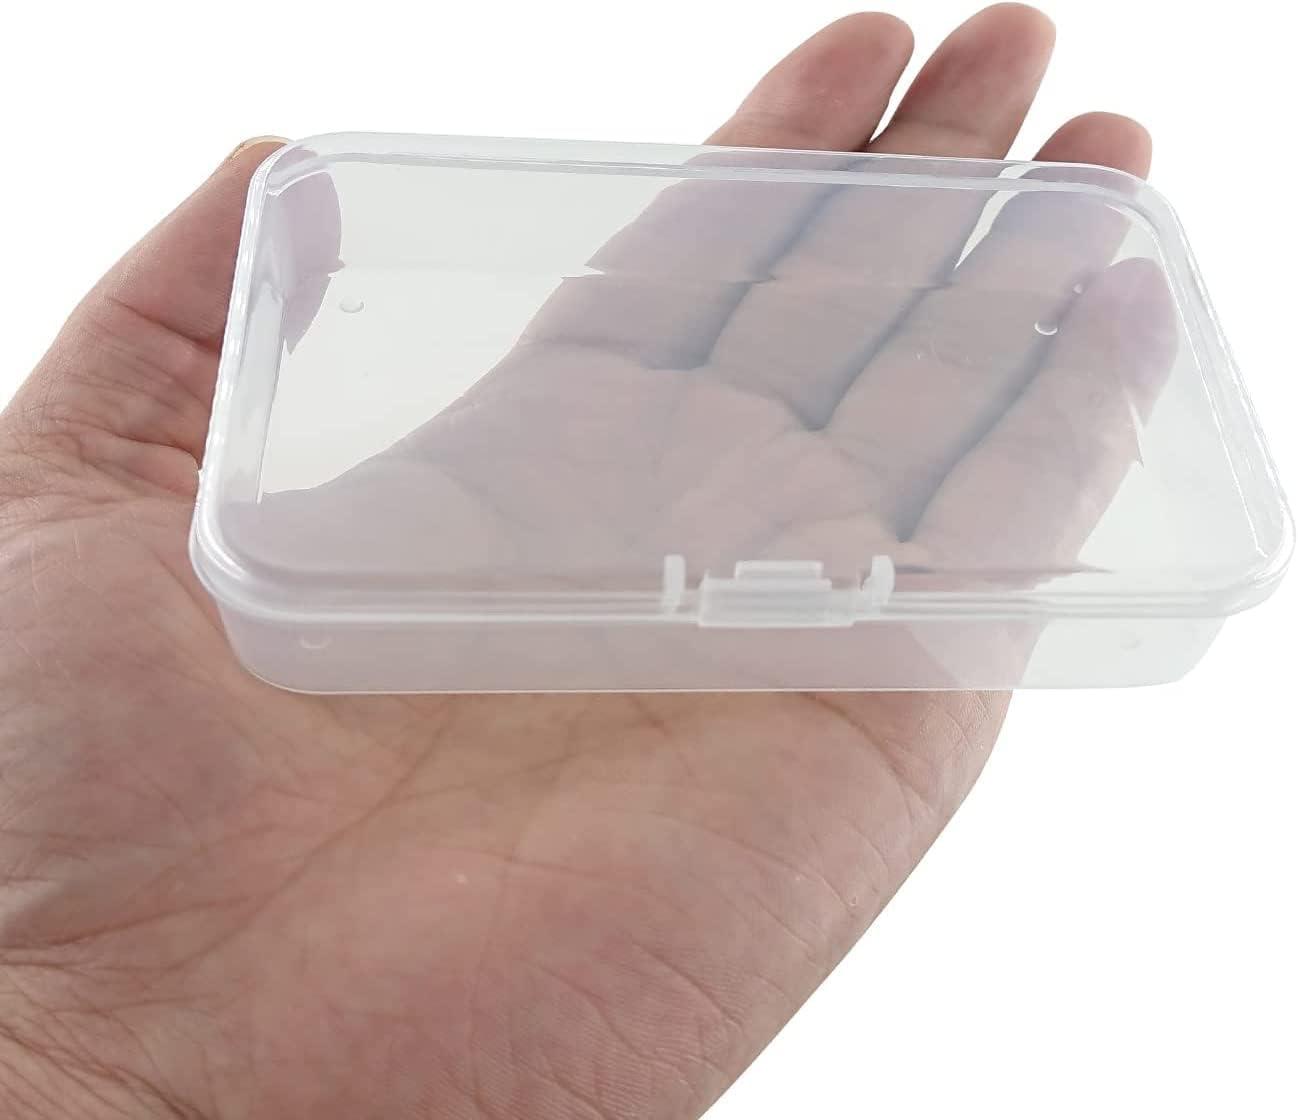 MFDSJ 6 Pcs Mini Plastic Storage Containers Box with Lid 4.5x3.4 Inches  Clear Rectangle Box for Collecting Small Items Beads Game Pieces Business  Cards Crafts Accessories